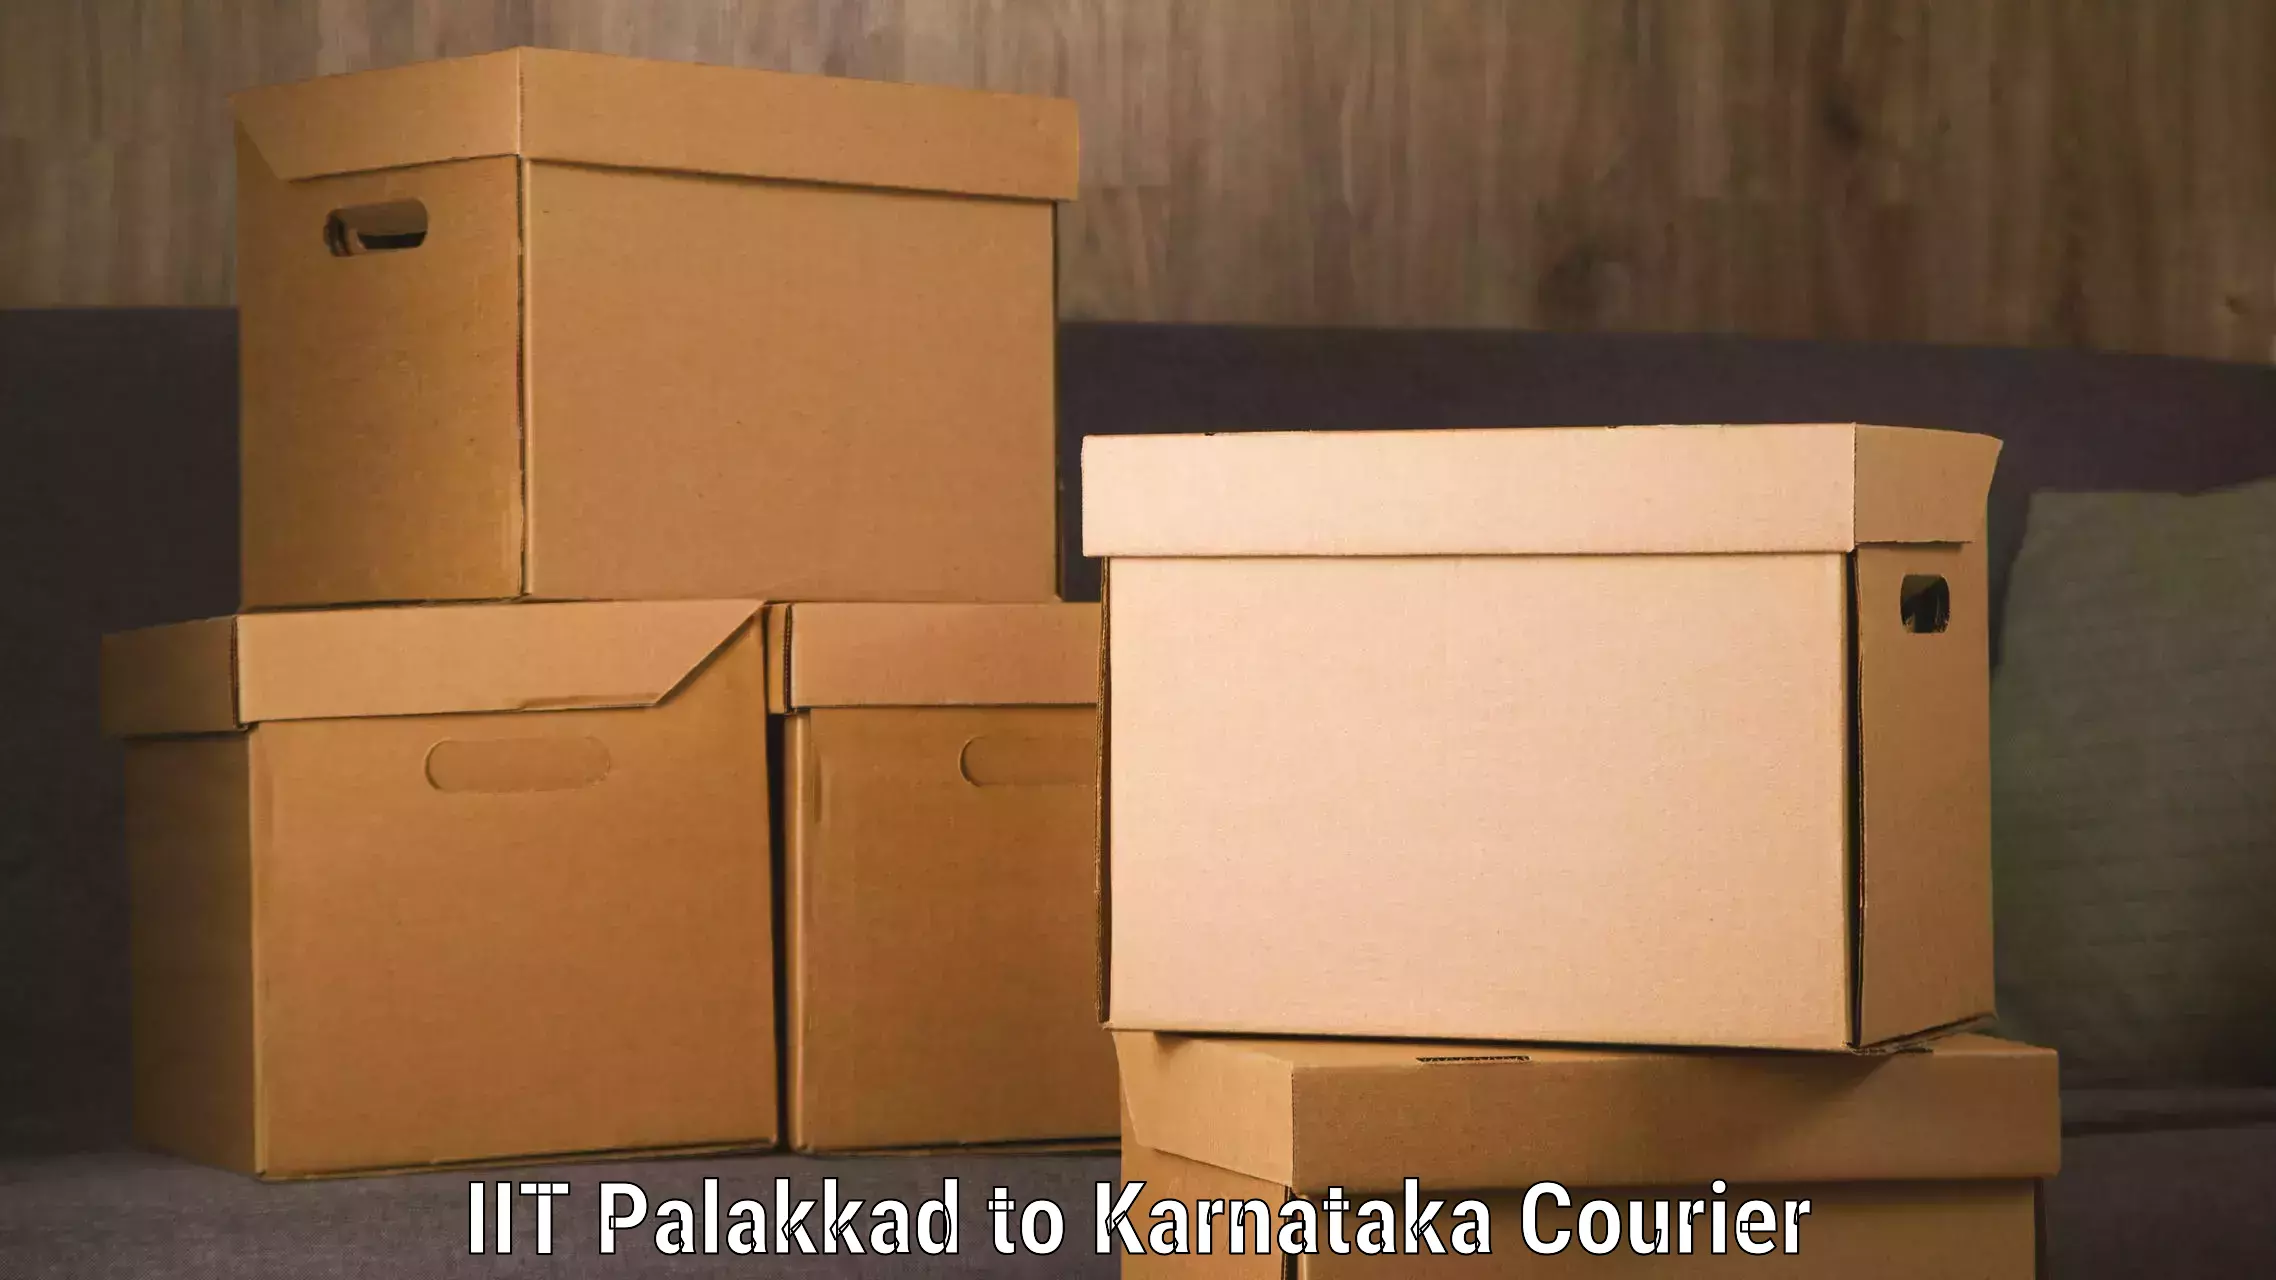 Rural area delivery in IIT Palakkad to Malavalli